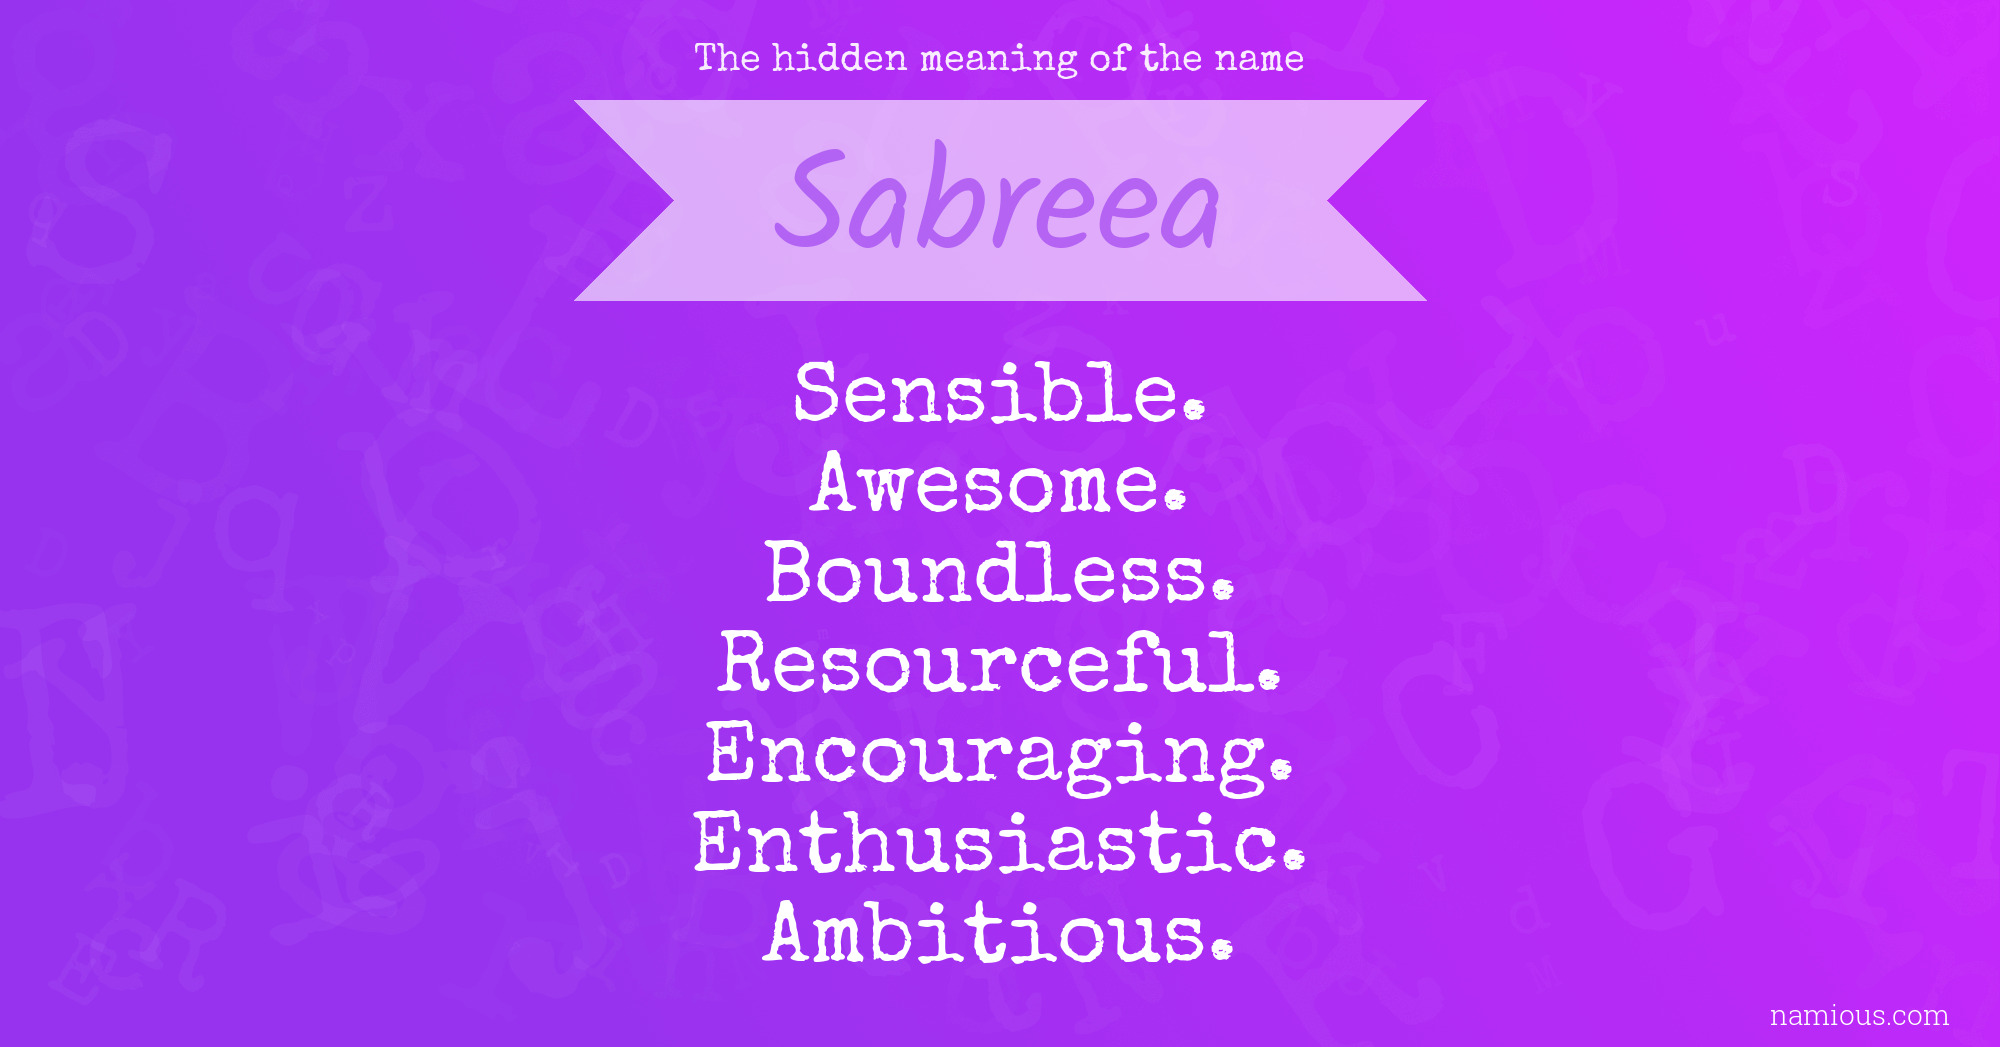 The hidden meaning of the name Sabreea